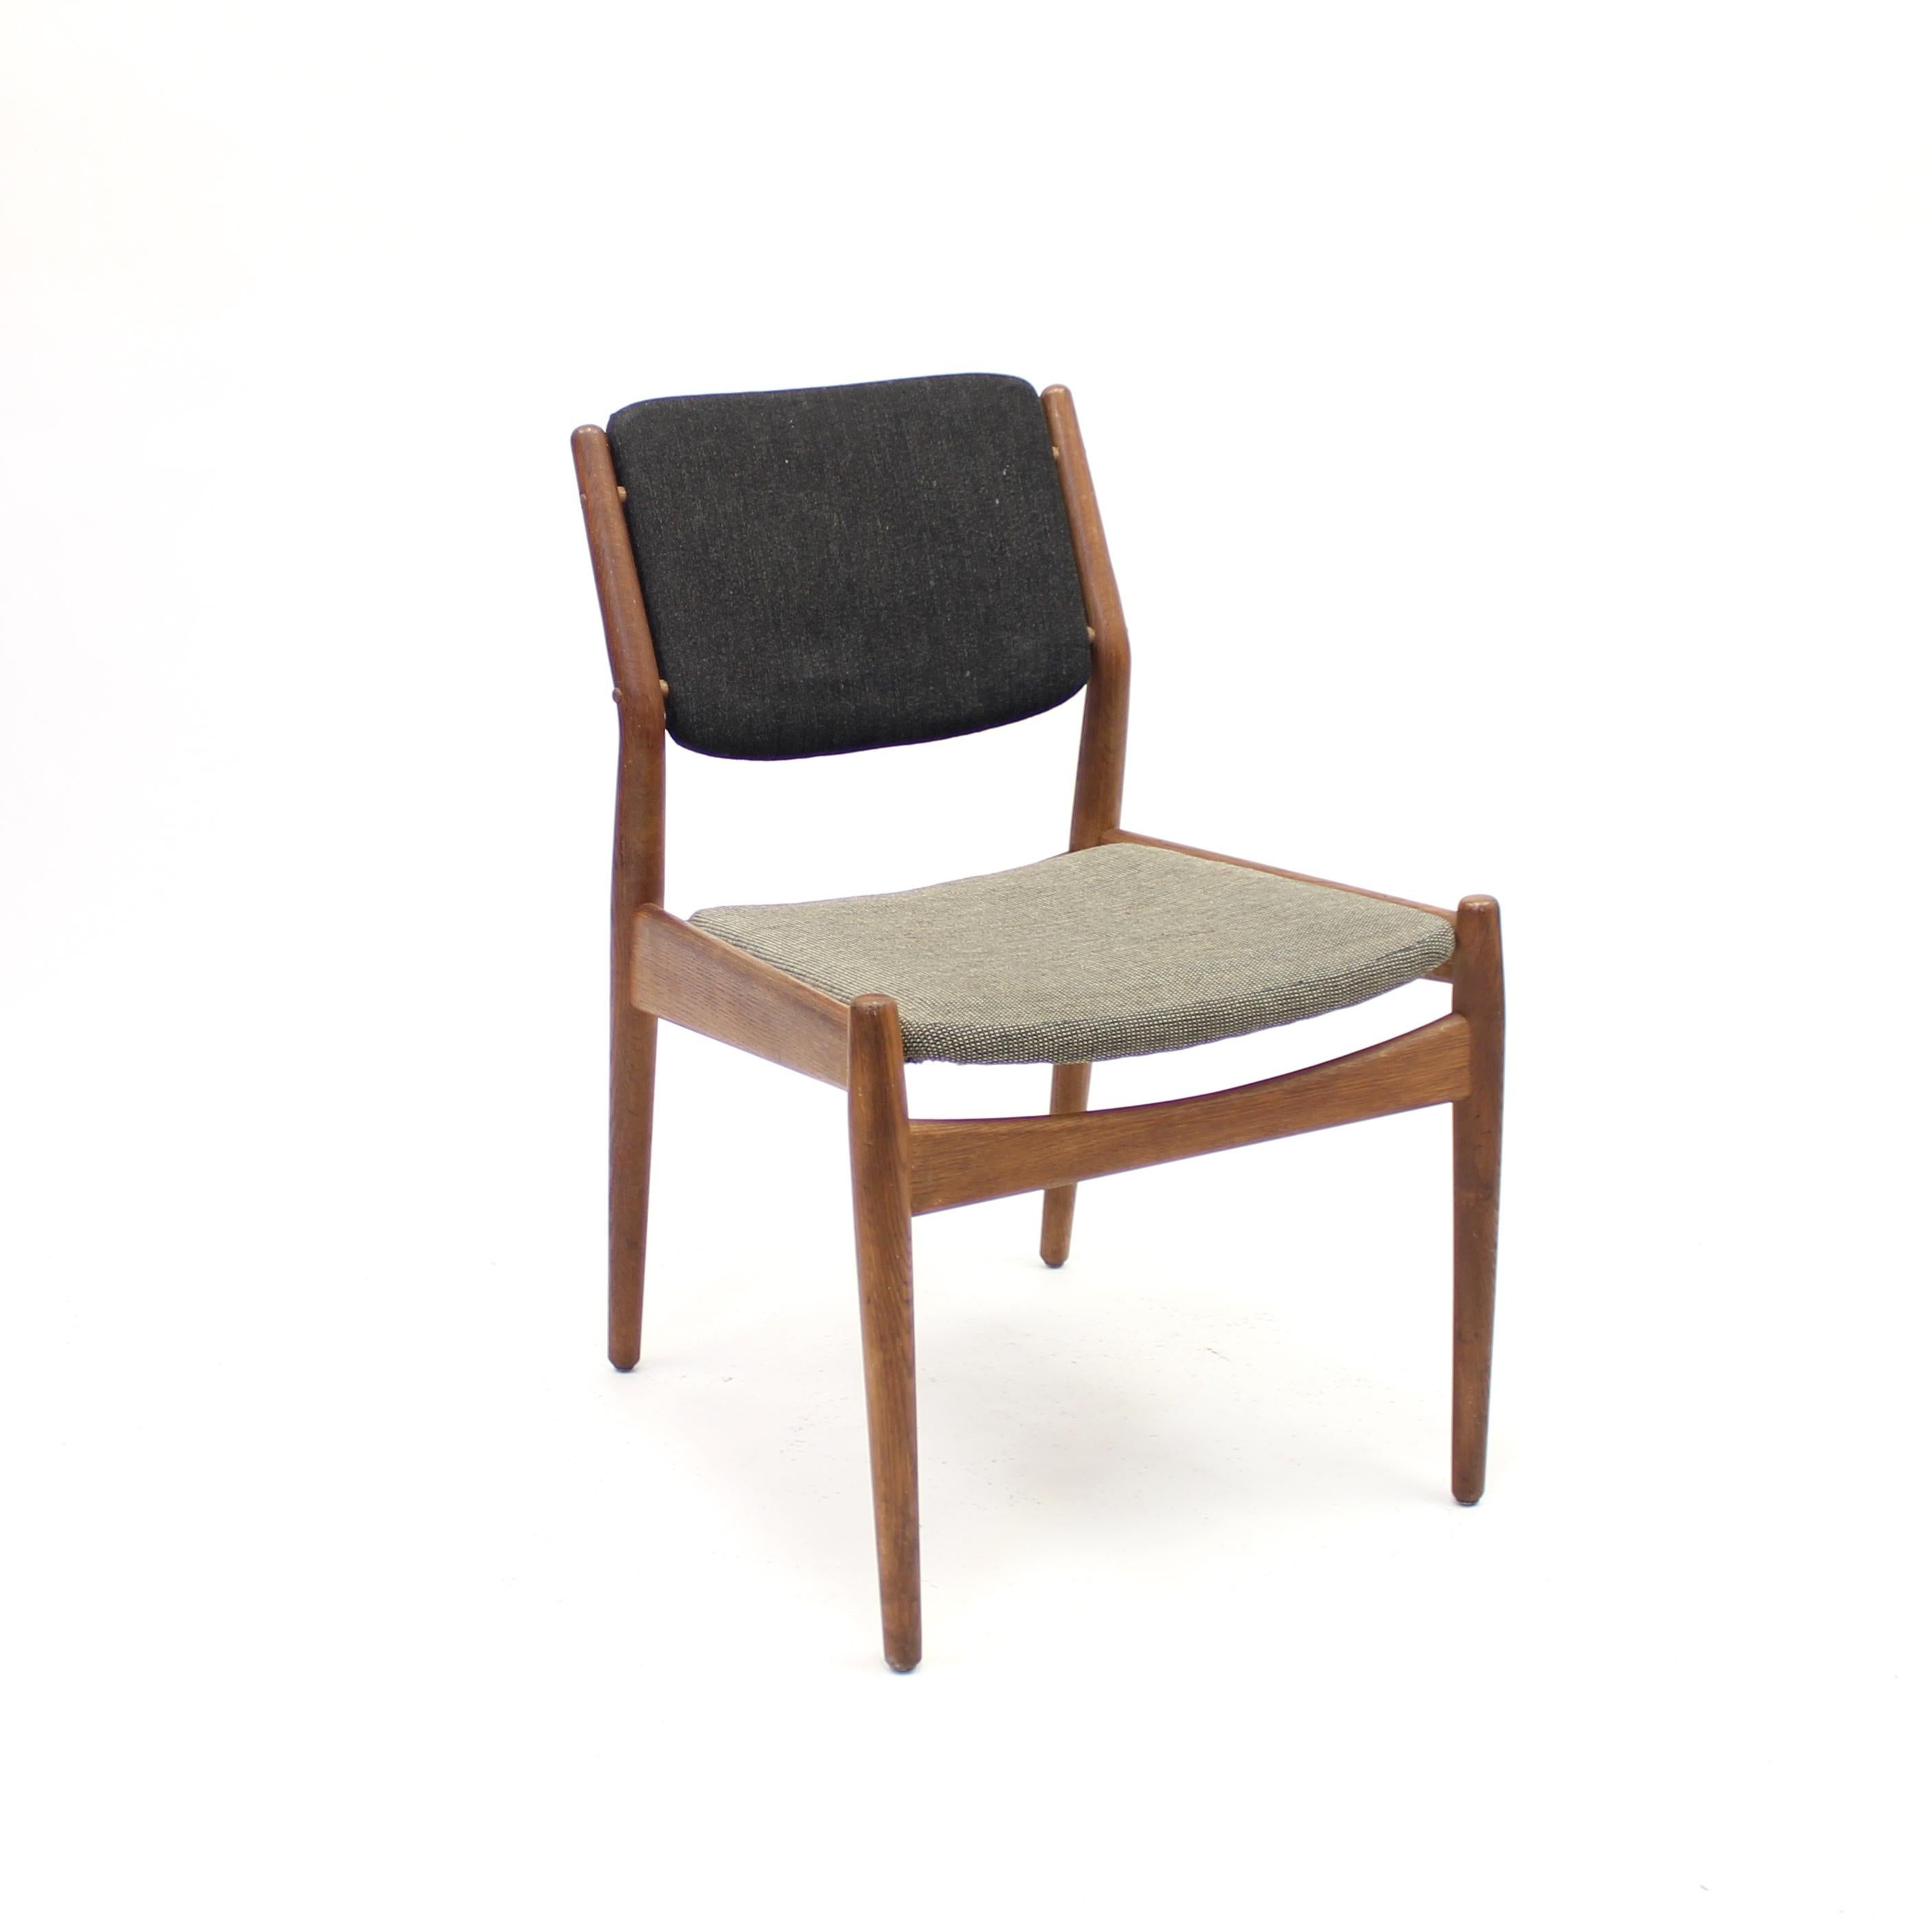 Teak chair designed by Arne Vodder & Anton Borg for Danish manufacturer Sibast in the 1950s. Most likely original fabric in a dark charcoal coloured back and a light grey seat. Good vintage condition with light ware consistent with age and use.